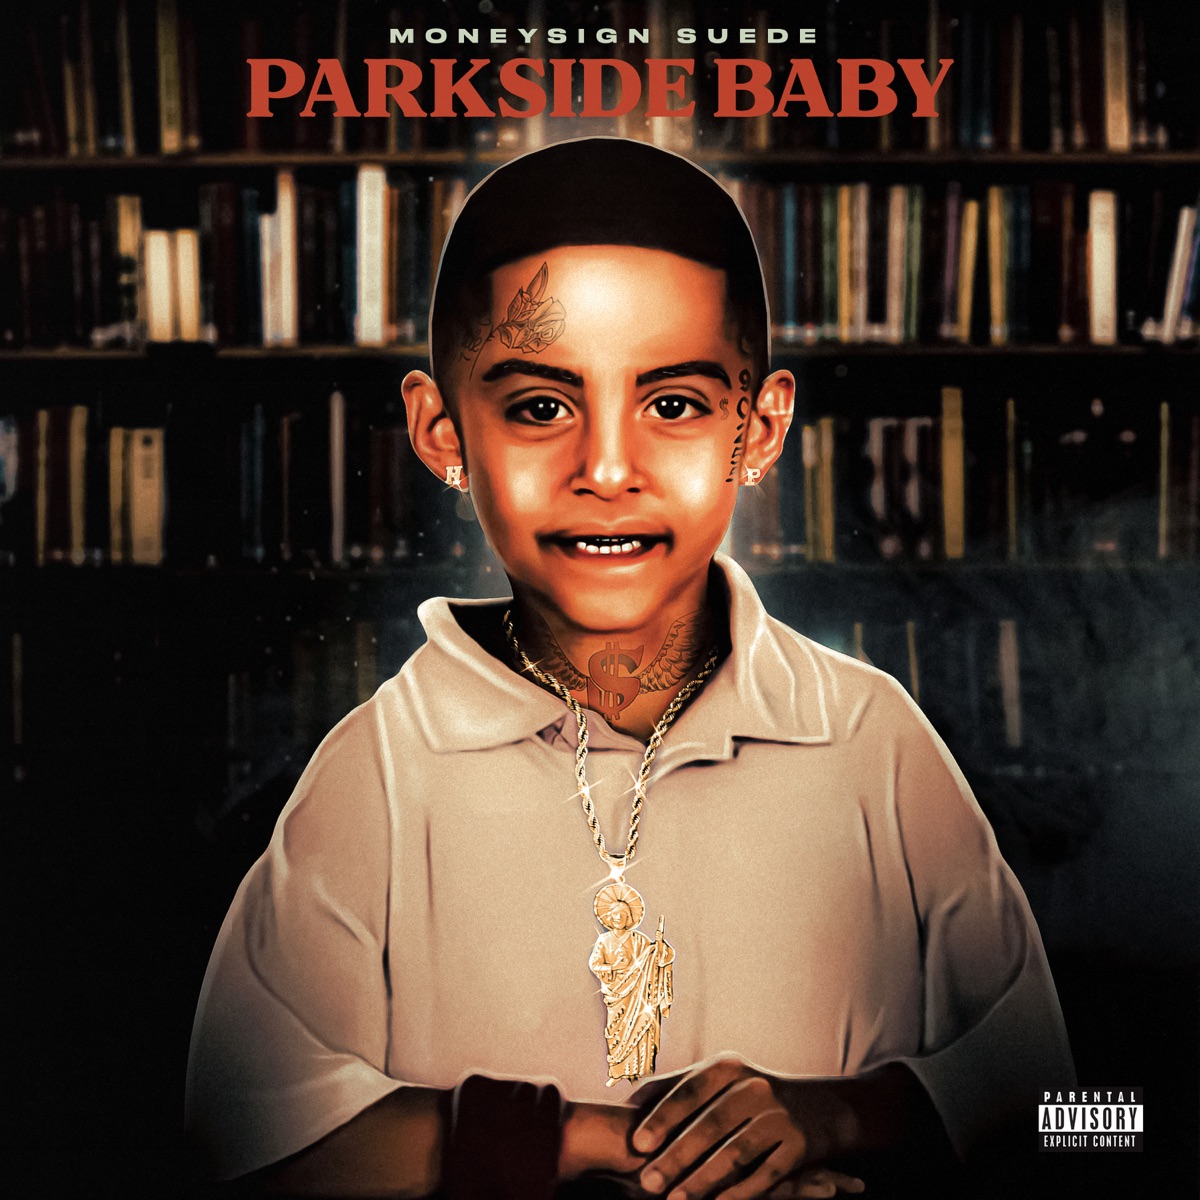 Parkside Baby - Album by MoneySign Suede - Apple Music